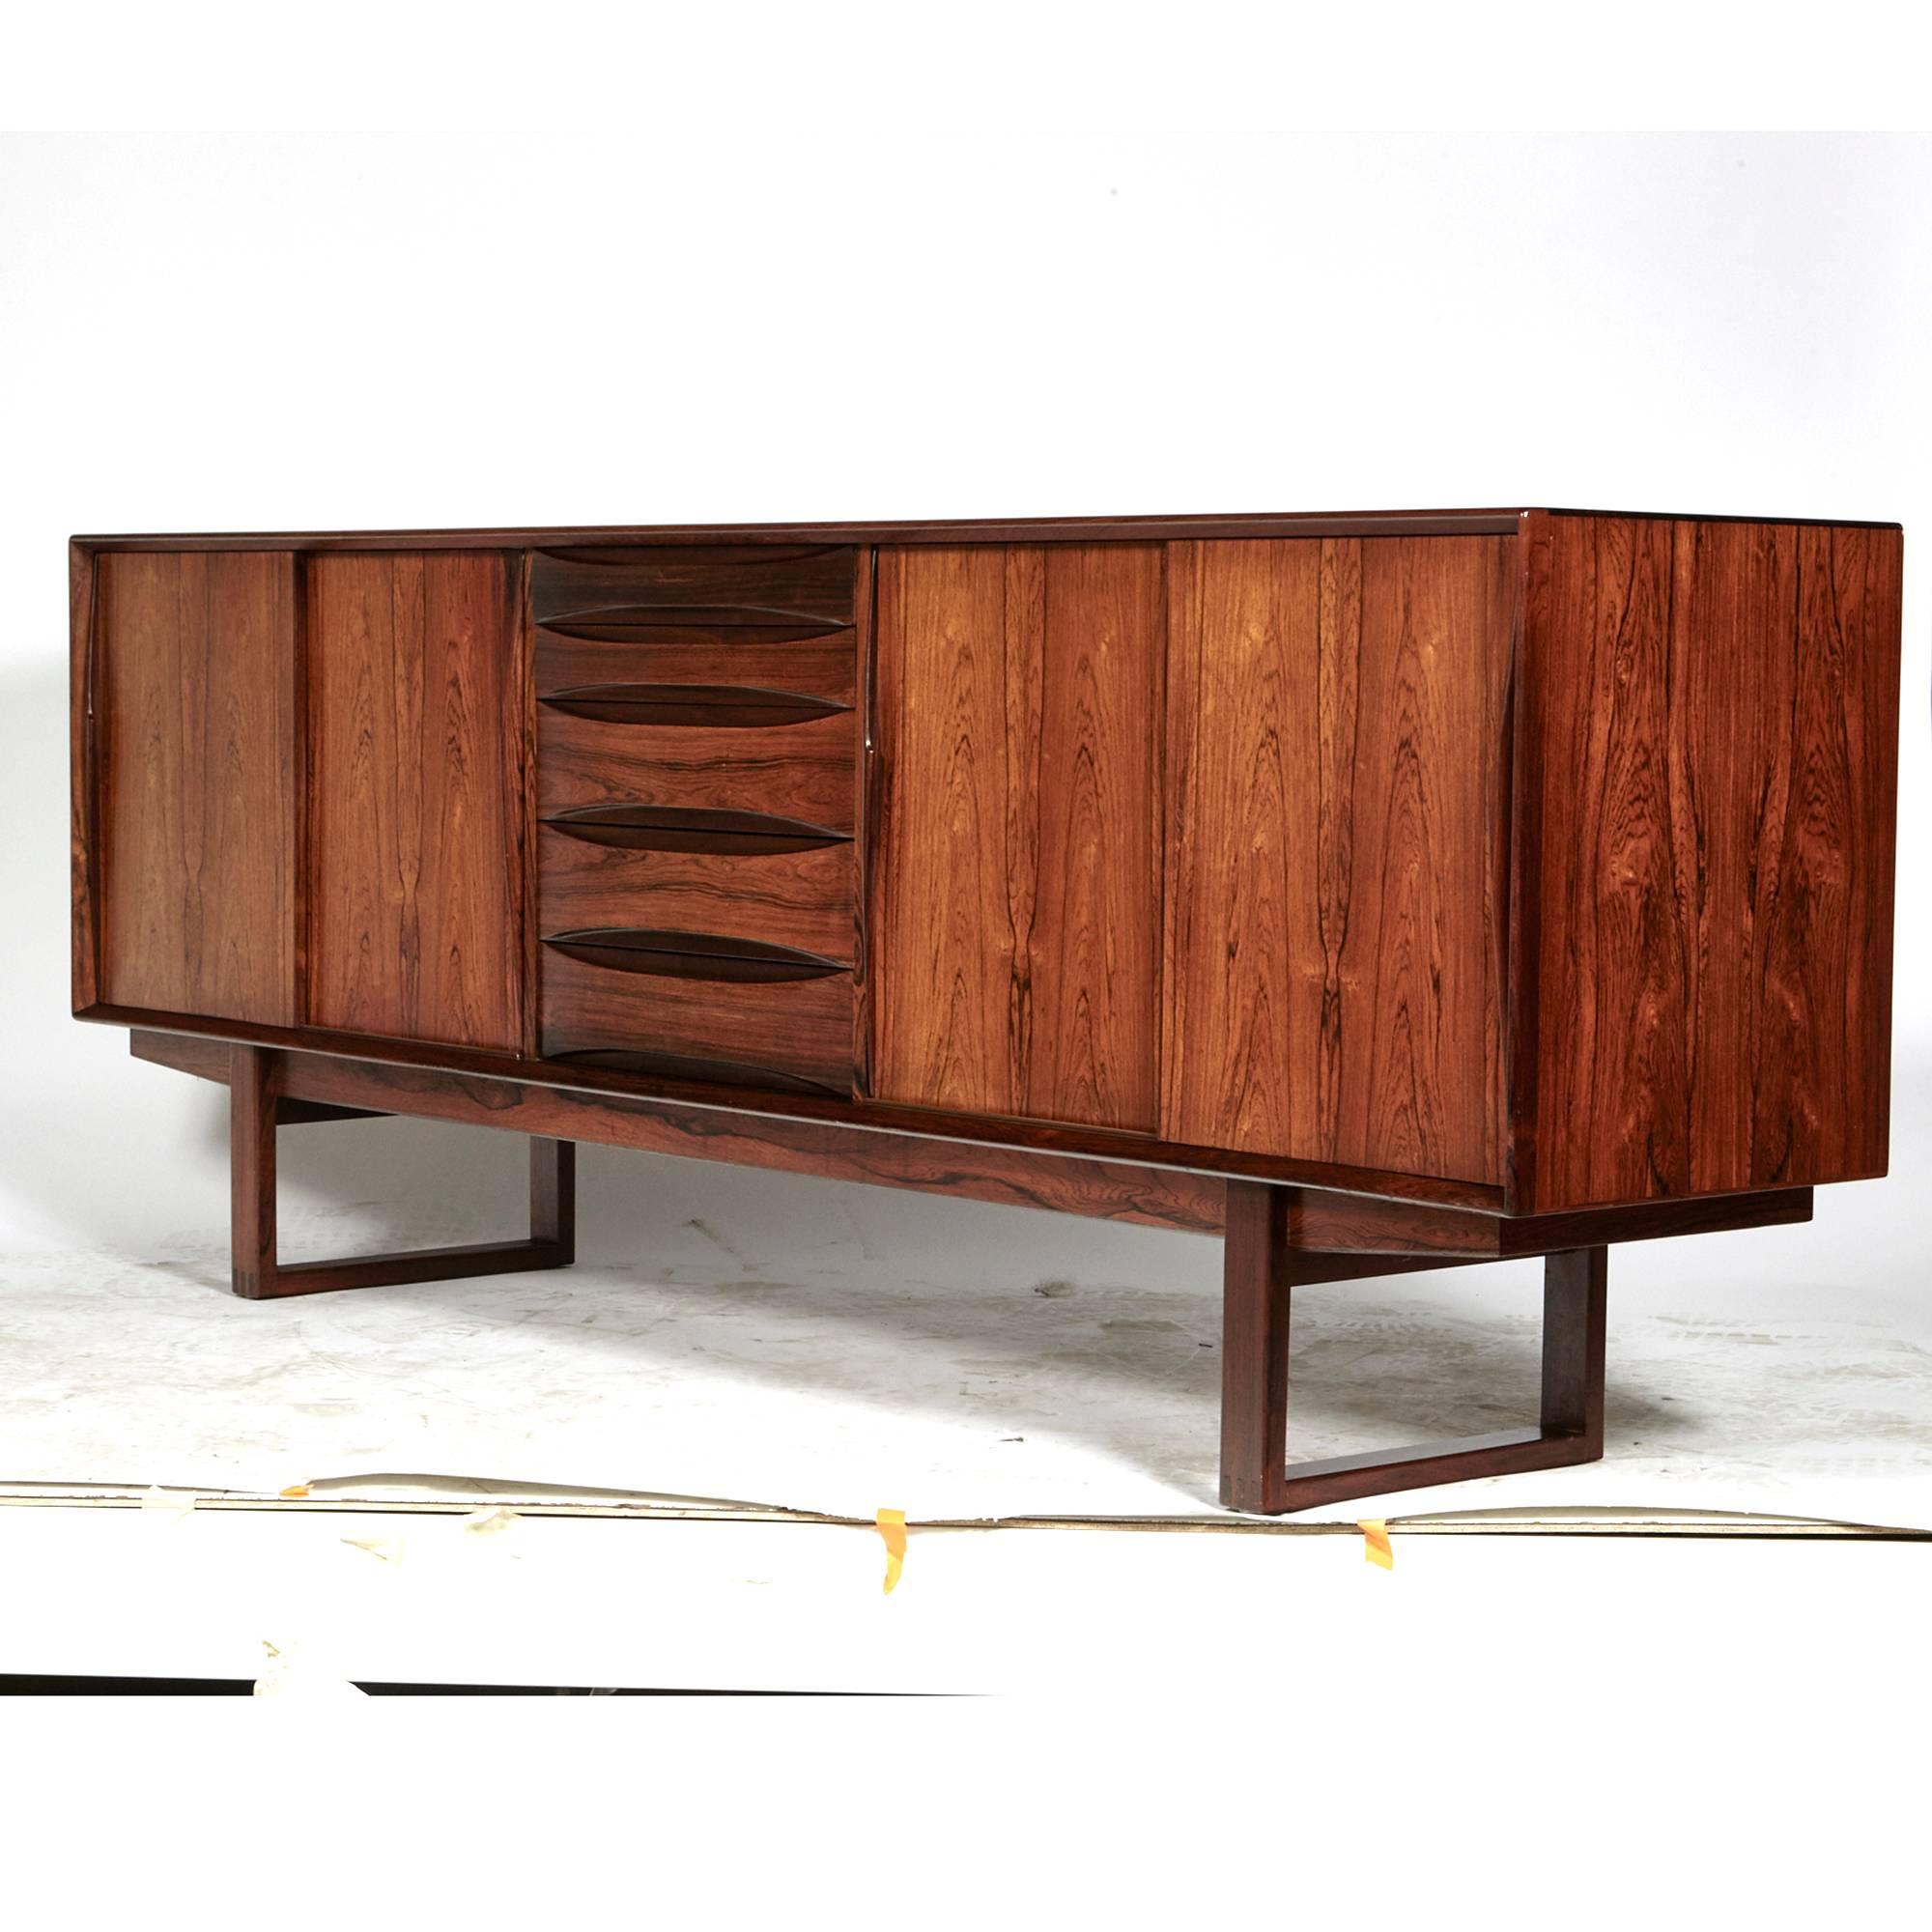 Vintage Danish rosewood credenza or sideboard with sled legs designed by Arne Vodder in the 1960s. The credenza has five drawers and adjustable shelving for storage. Sculpted wood drawer pulls. All-over nice rosewood grain. Excellent condition.